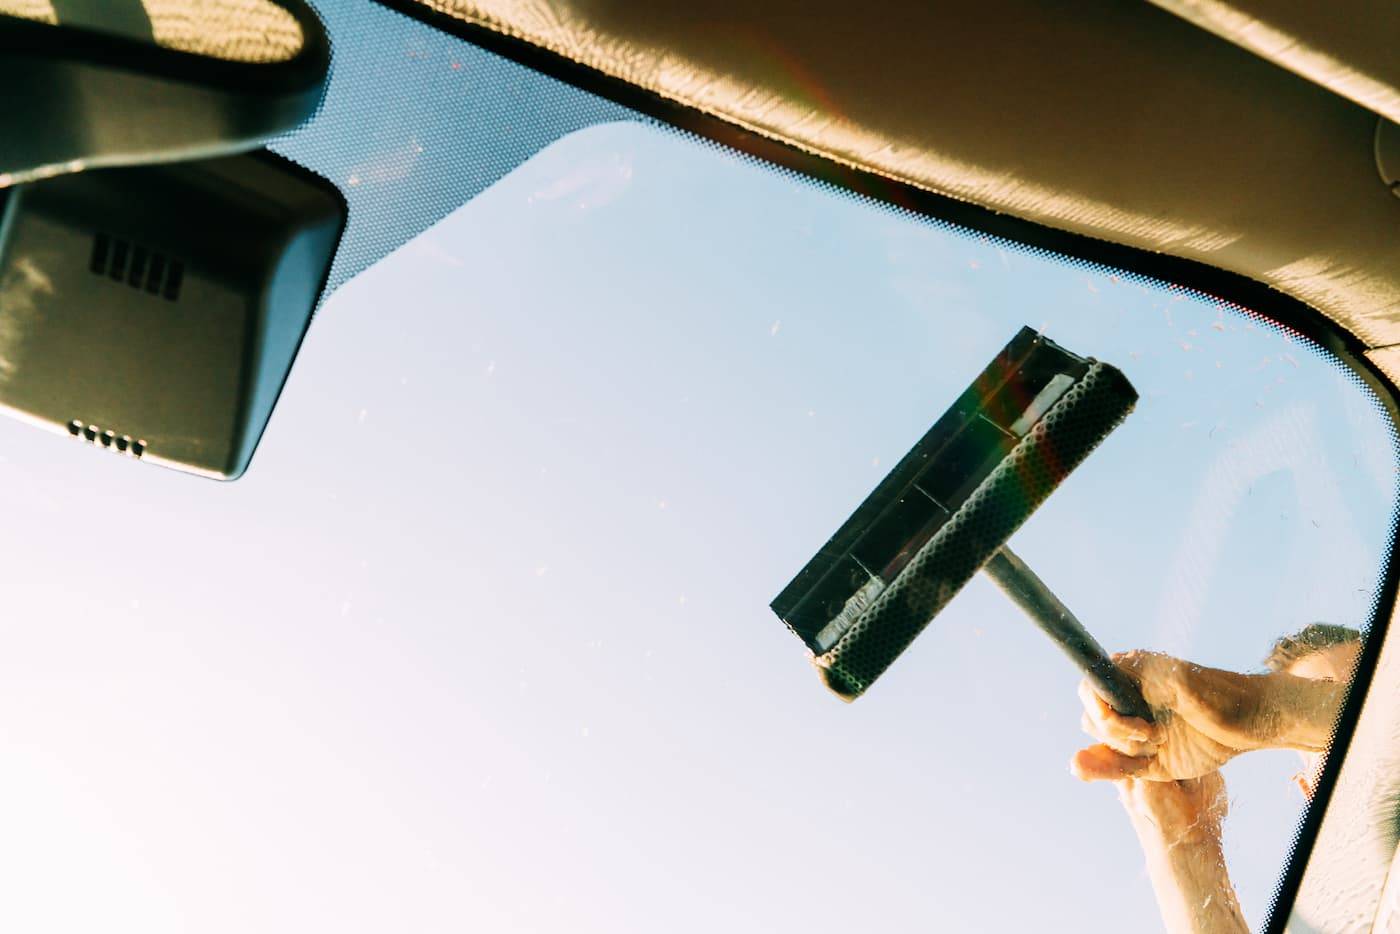 A vehicle going through a car wash. The windshield being washed with a sponge by hand. An unidentified person is holding the tool.